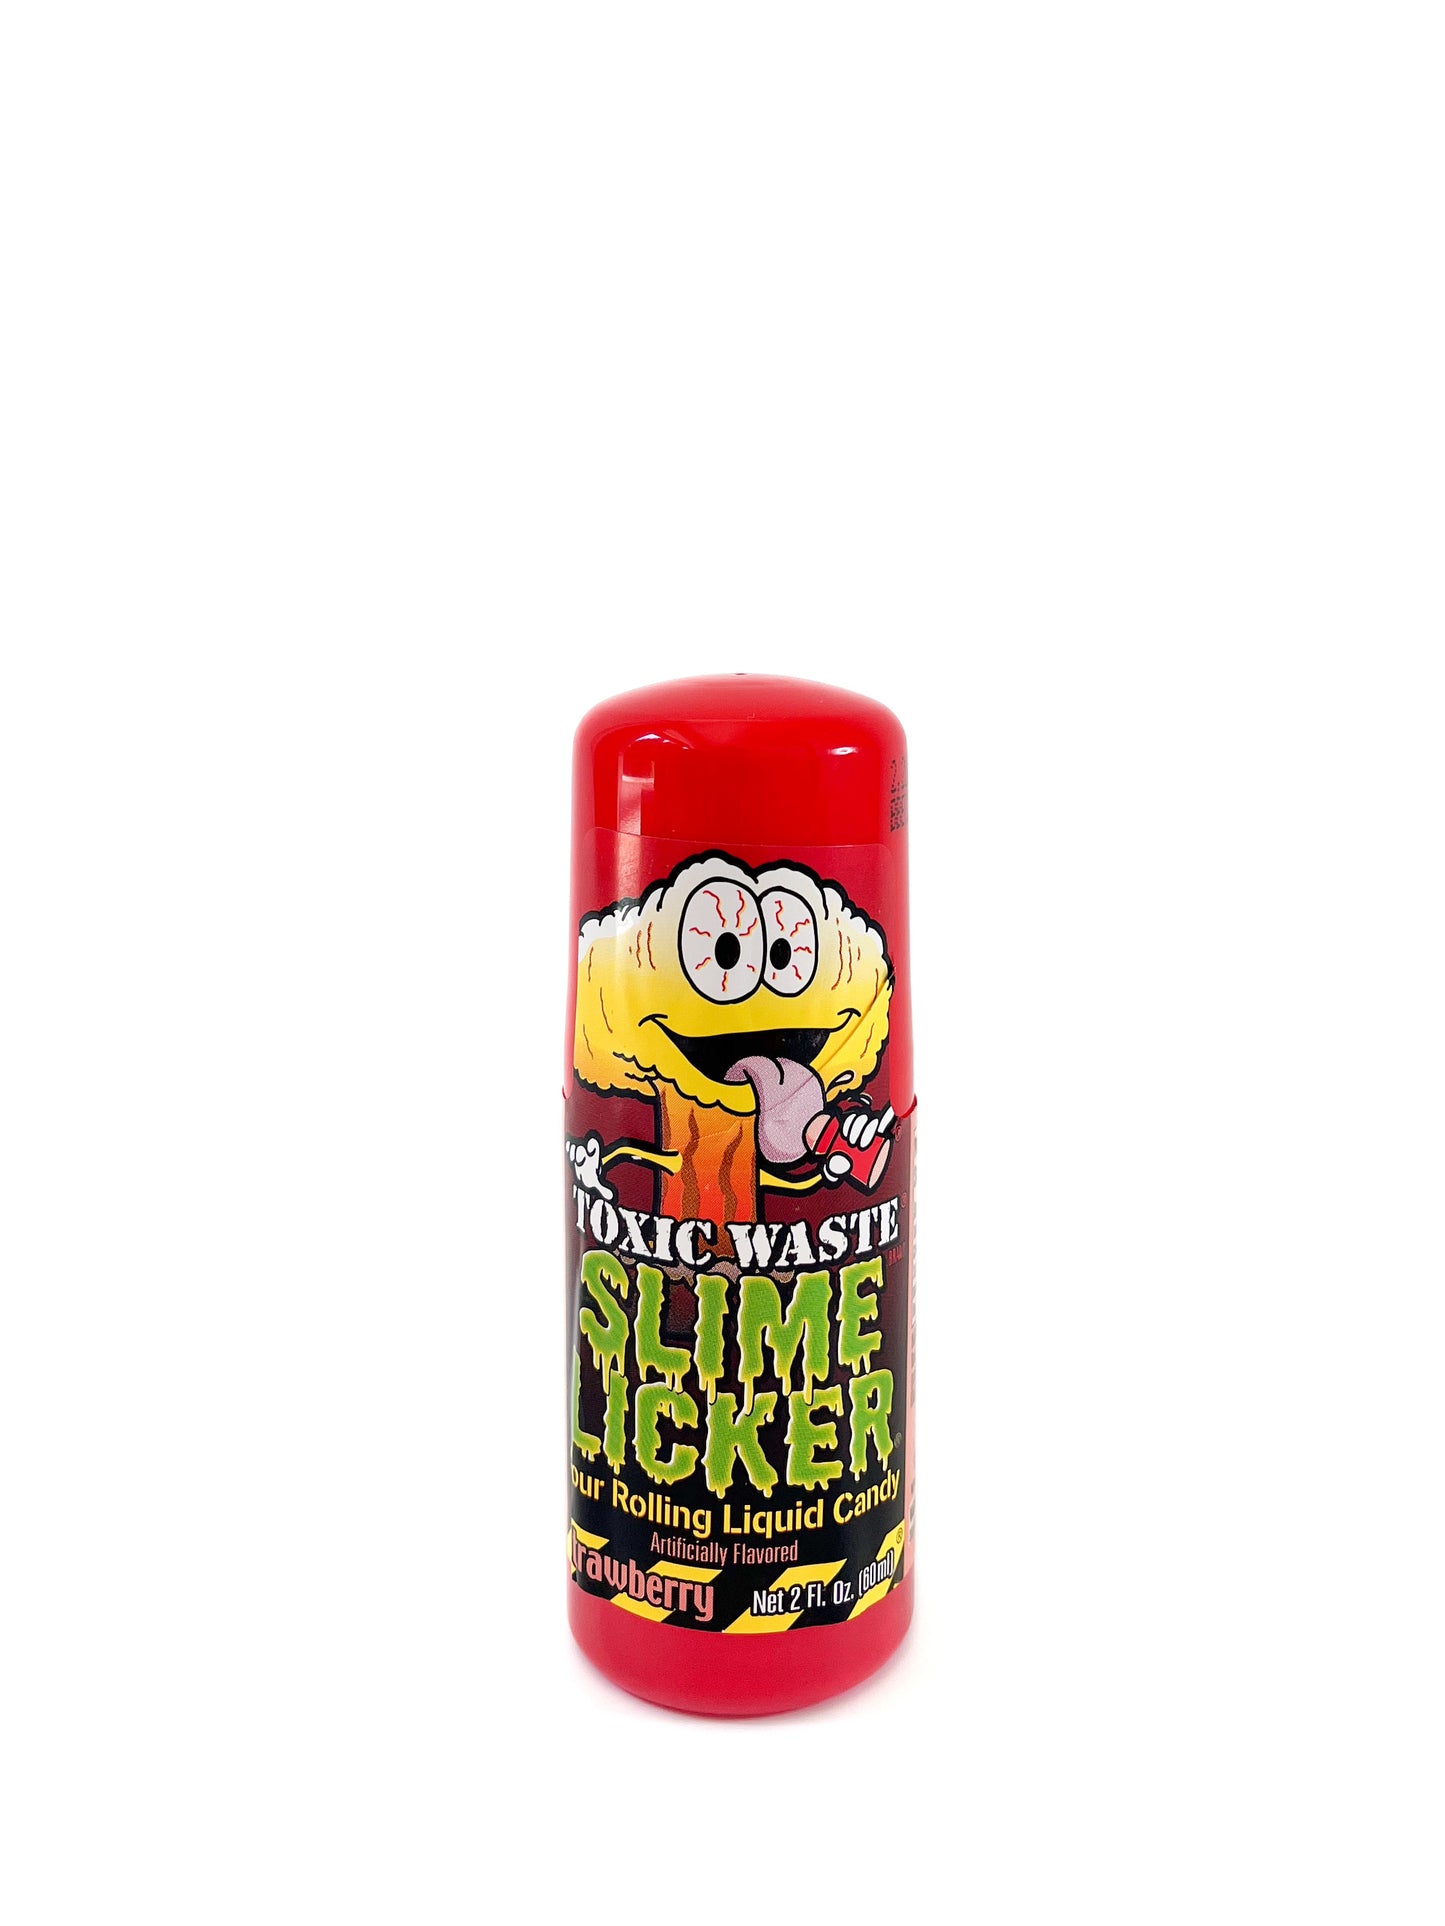 Toxic Waste Slime Licker Sour Rolling Liquid Candy (US)